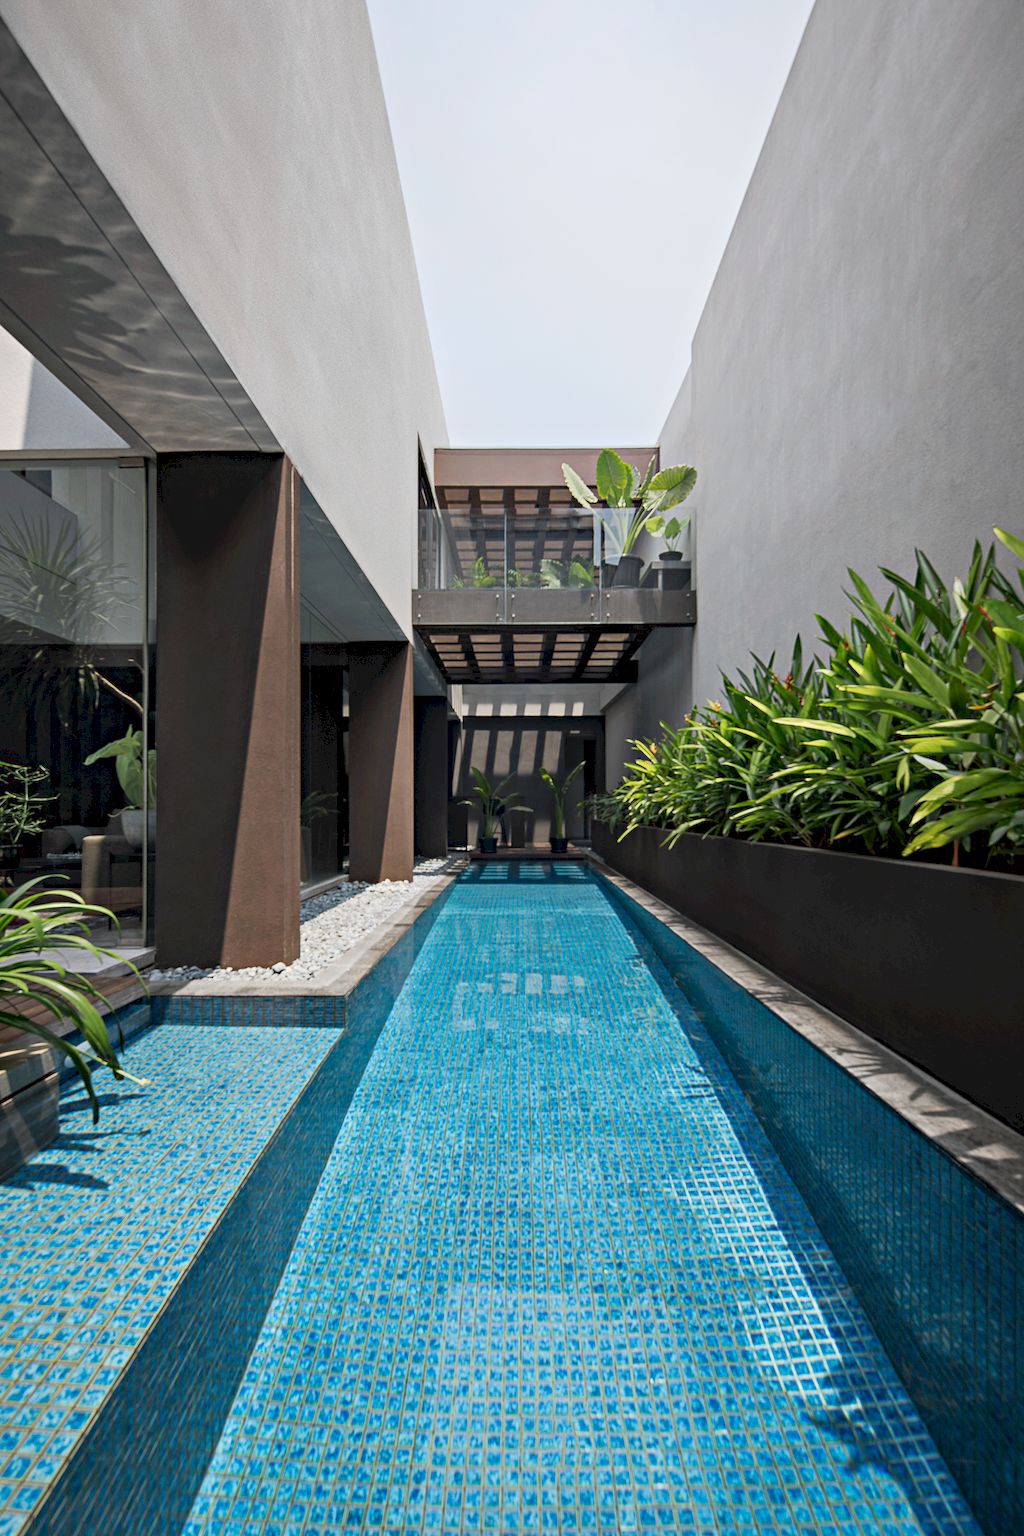 Rumah RifBagus House, Elegant Home in Indonesia by Gets Architects